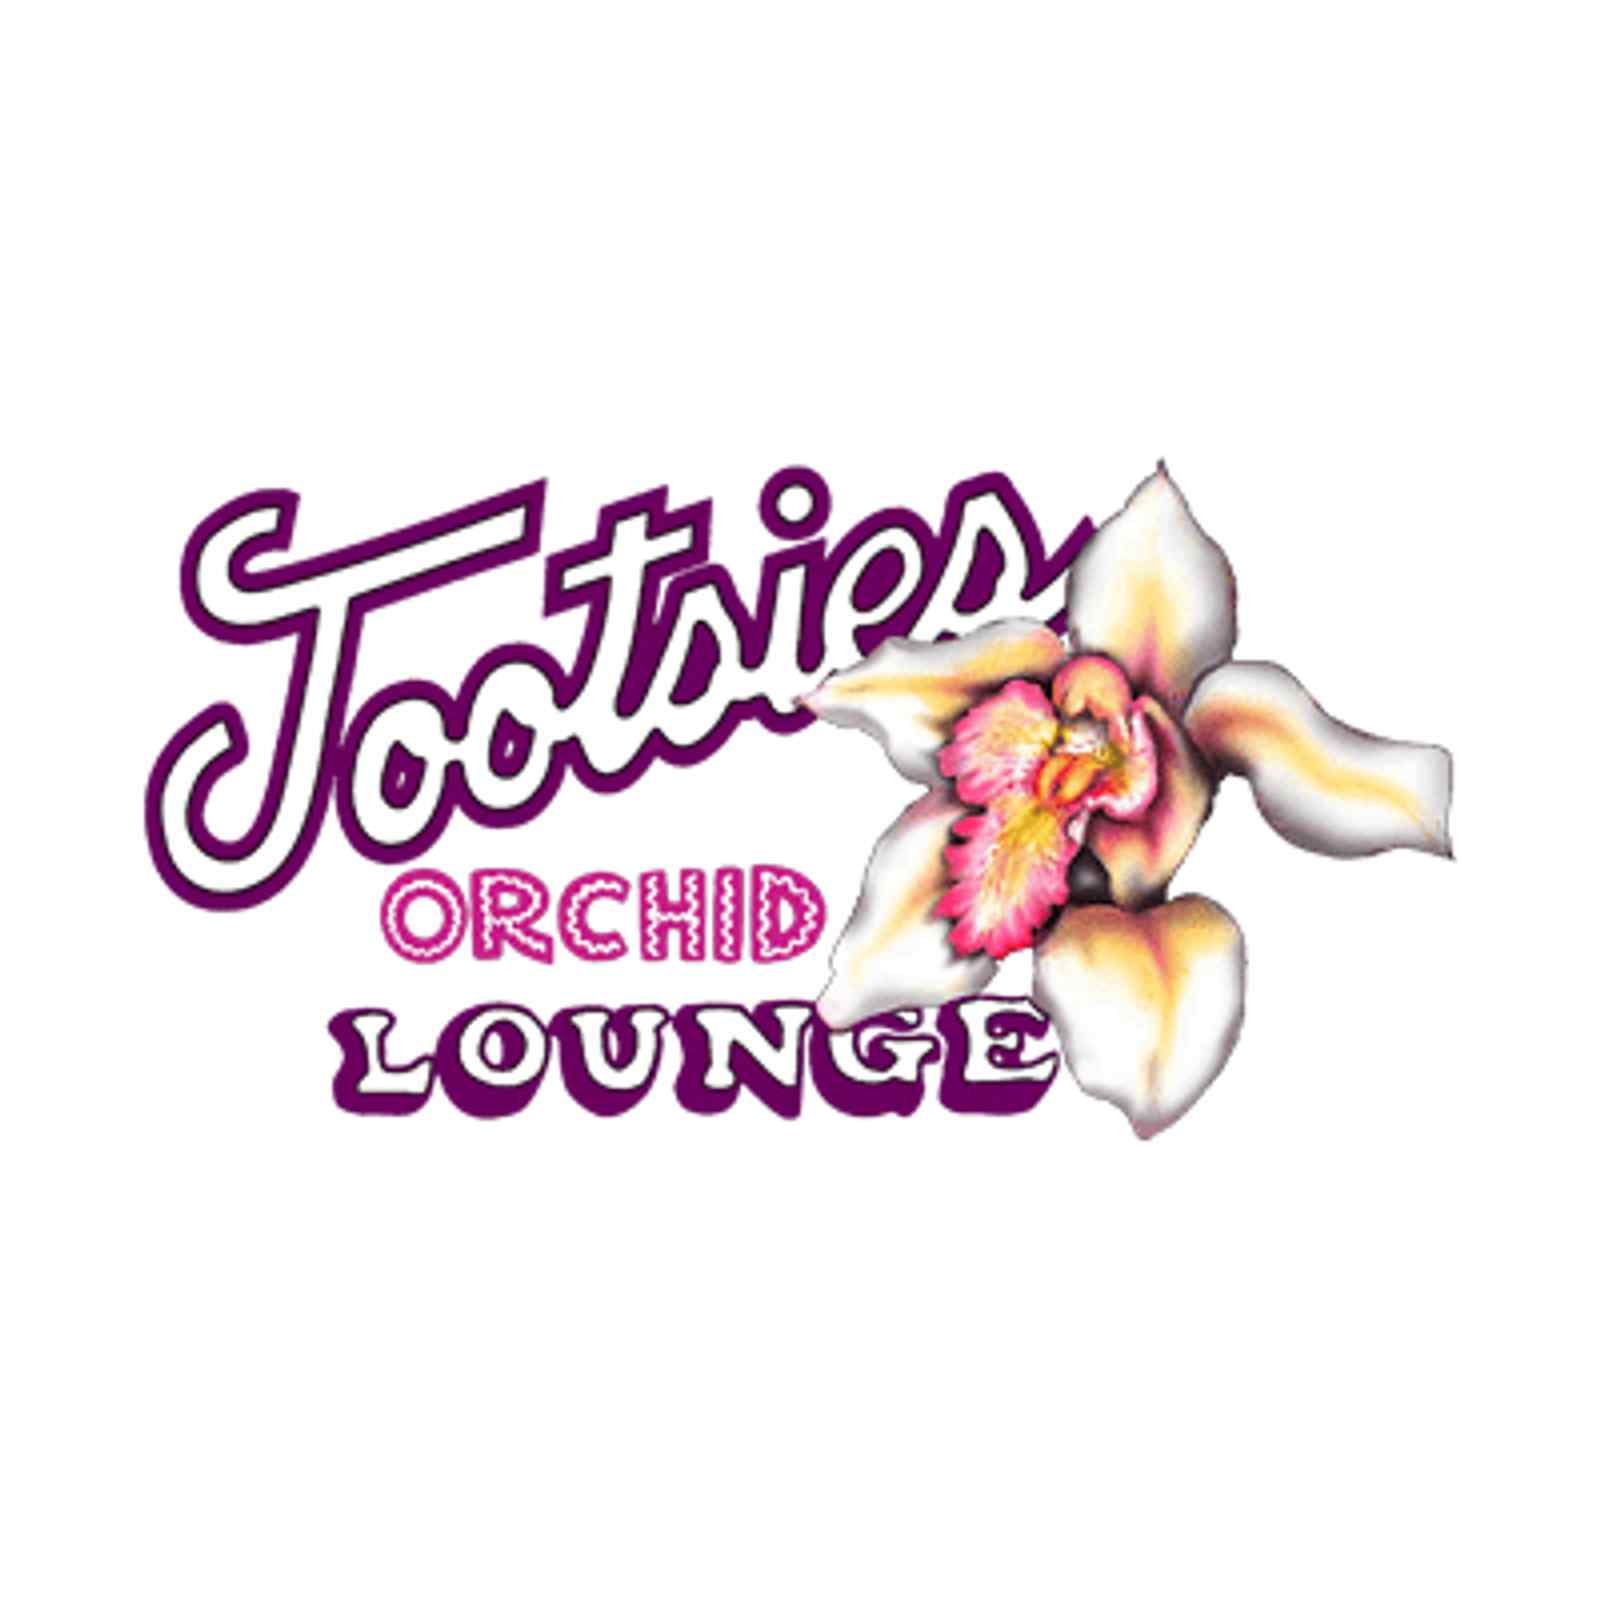 Tootsie’s Orchid Lounge